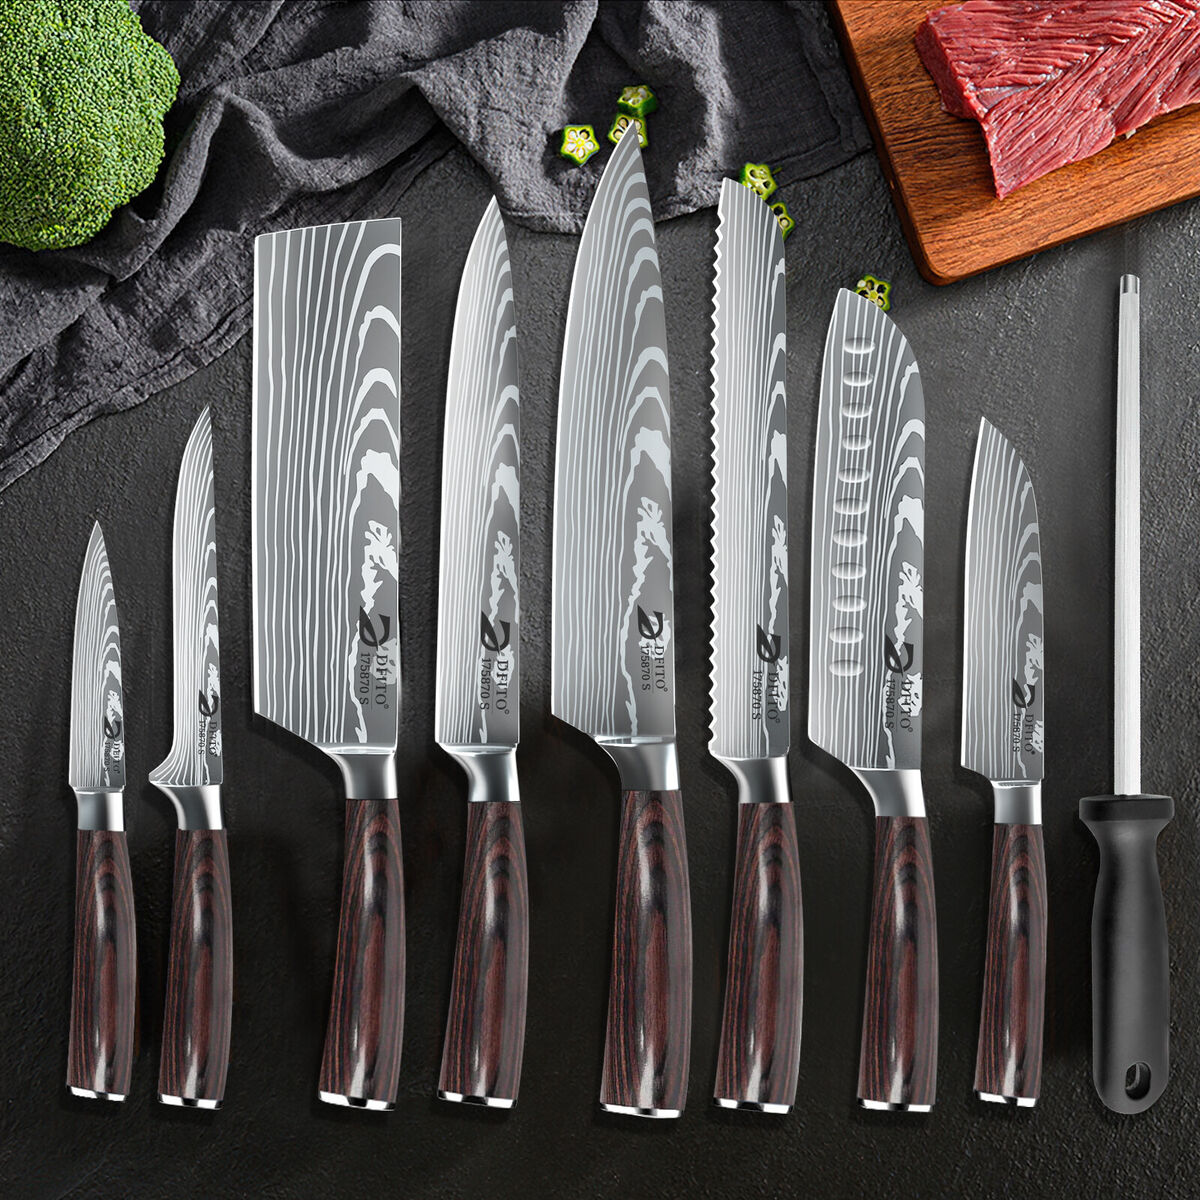 XITUO stainless steel kitchen knives set Japanese chef knife Damascus steel  Pattern Utility Paring Santoku Slicing knife Health - AliExpress